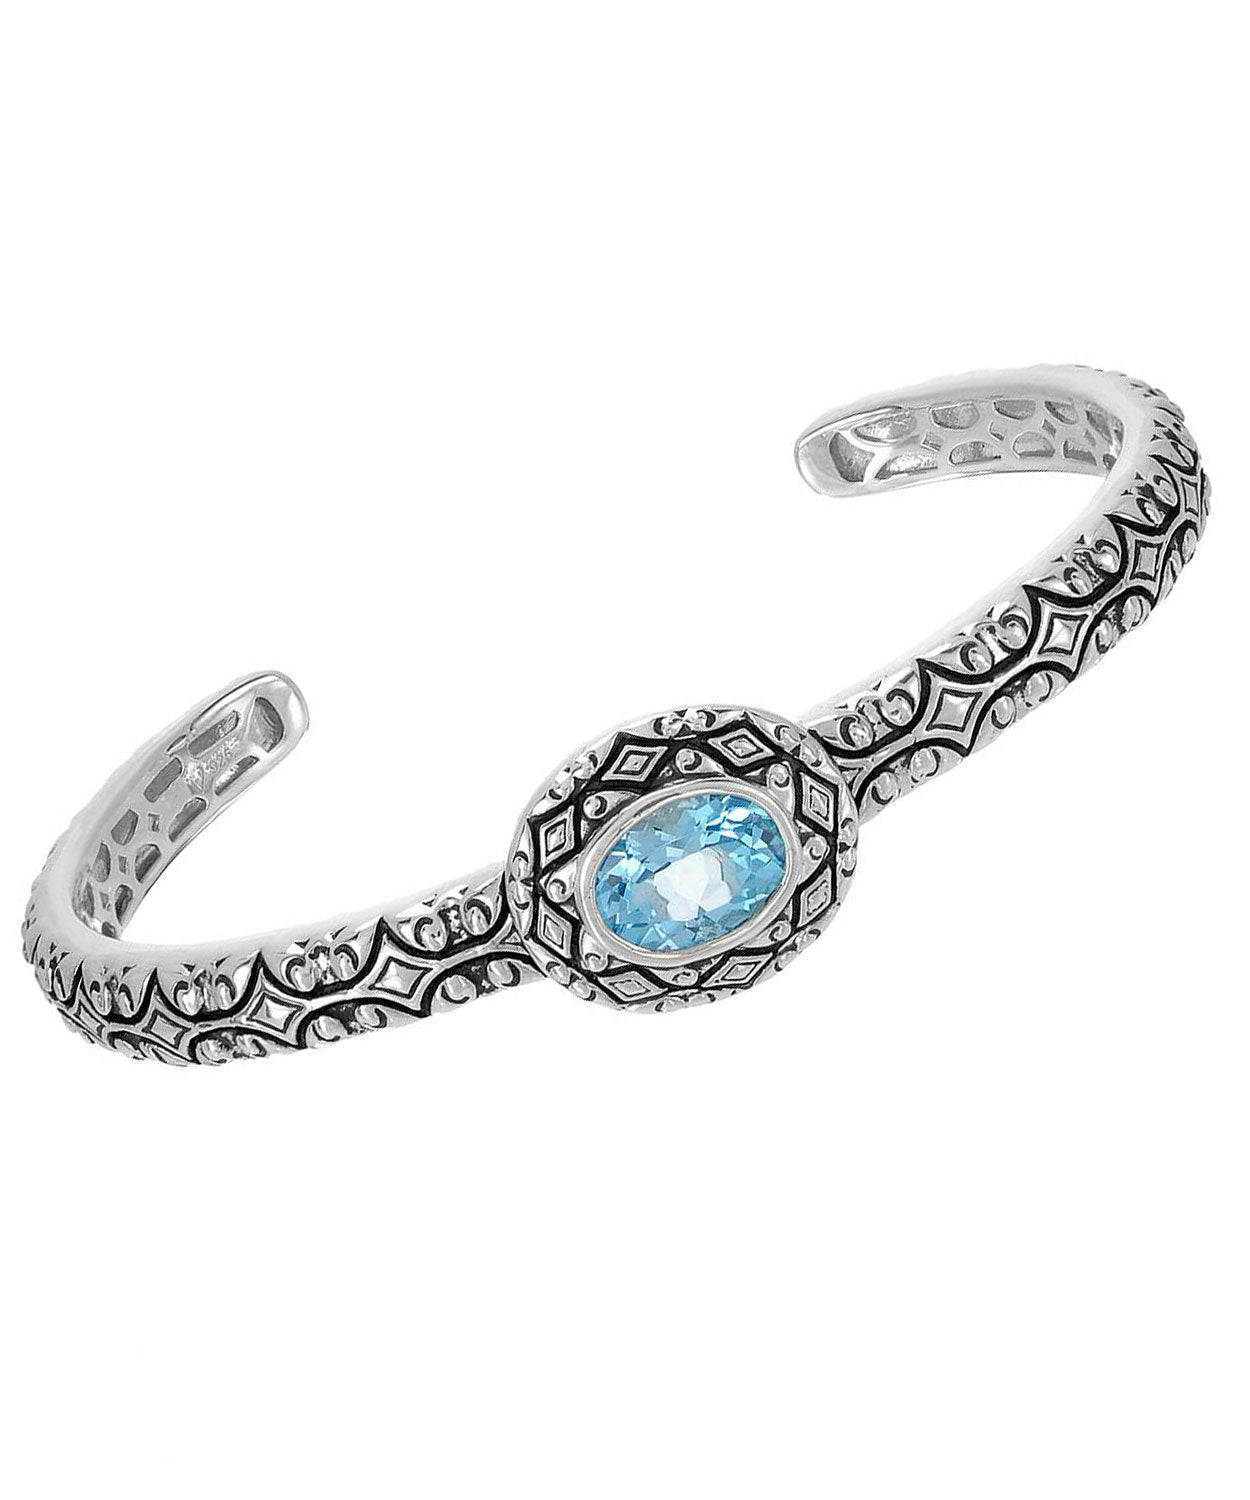 Colore by Simon Golub 3.55 ctw Natural Fine Sky Blue Topaz Rhodium Plated 925 Sterling Silver Cuff Bracelet View 1